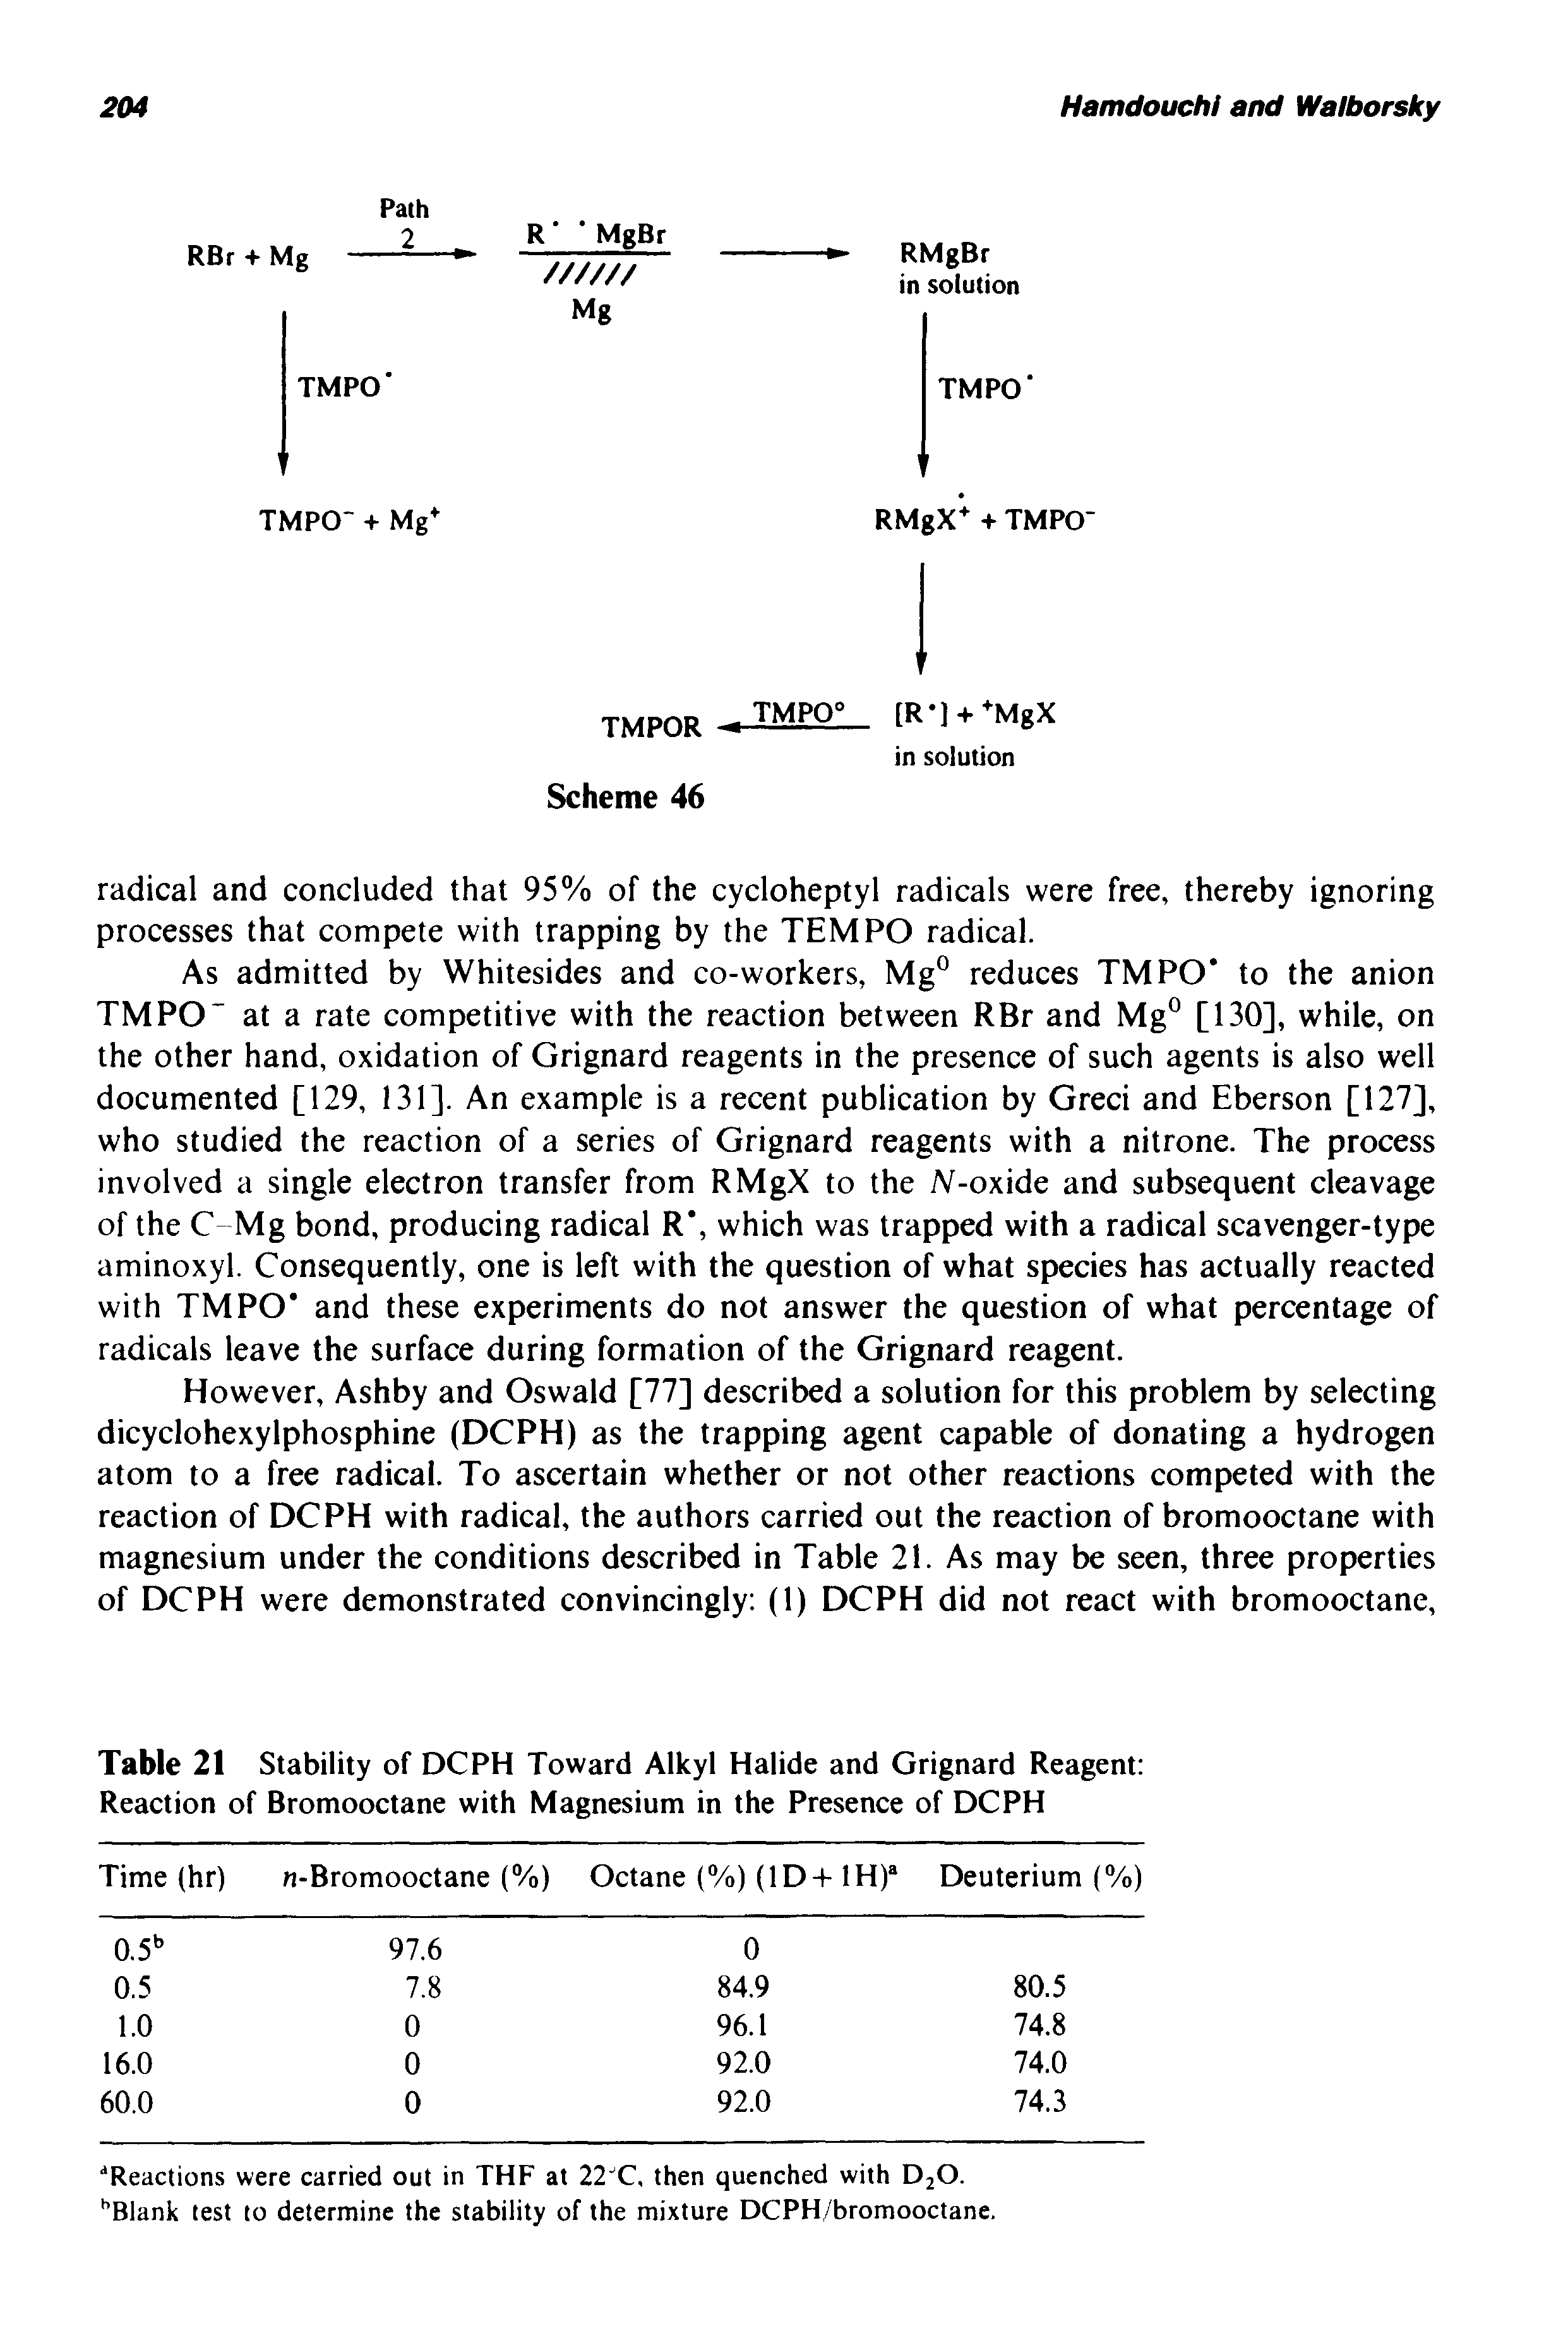 Table 21 Stability of DCPH Toward Alkyl Halide and Grignard Reagent Reaction of Bromooctane with Magnesium in the Presence of DCPH...